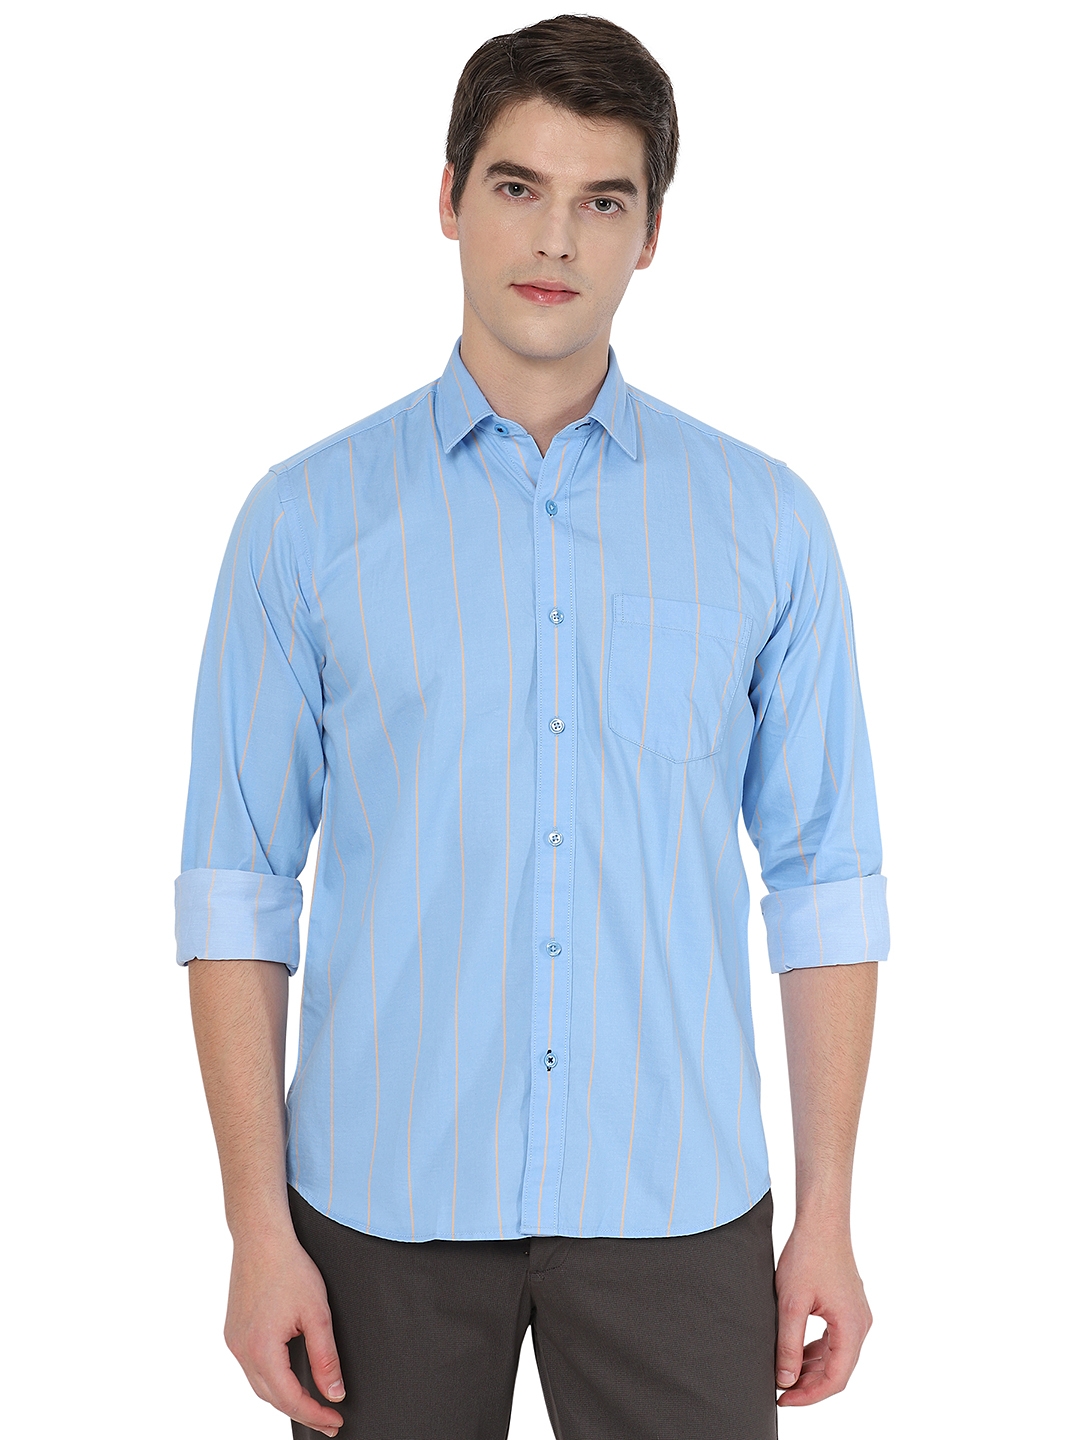 Greenfibre | Light Blue Striped Slim Fit Casual Shirt | Greenfibre 0